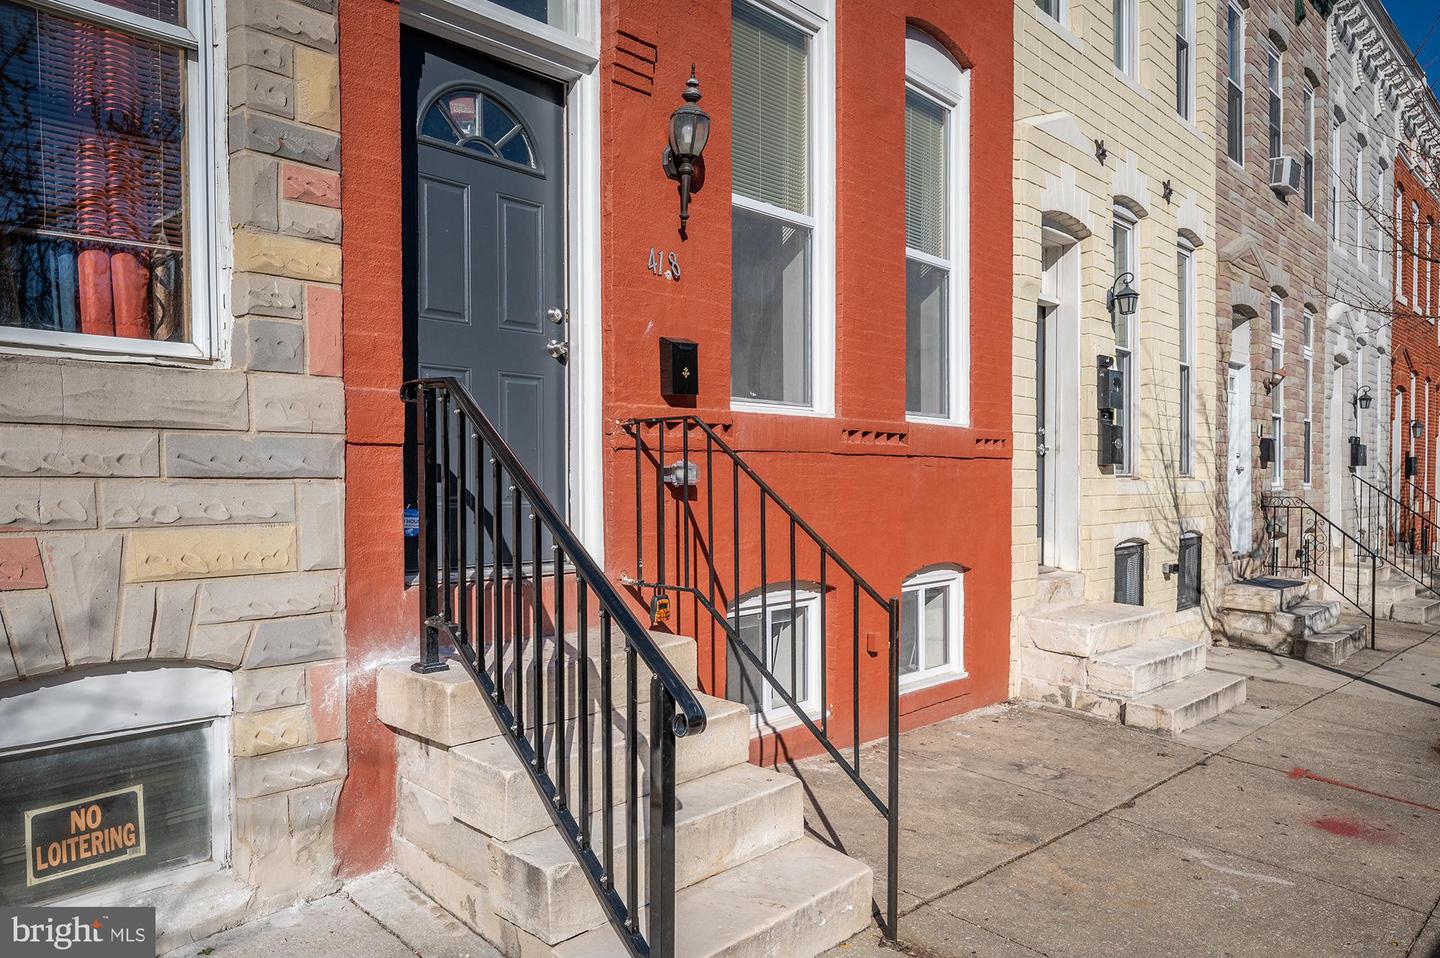 View Baltimore, MD 21218 townhome